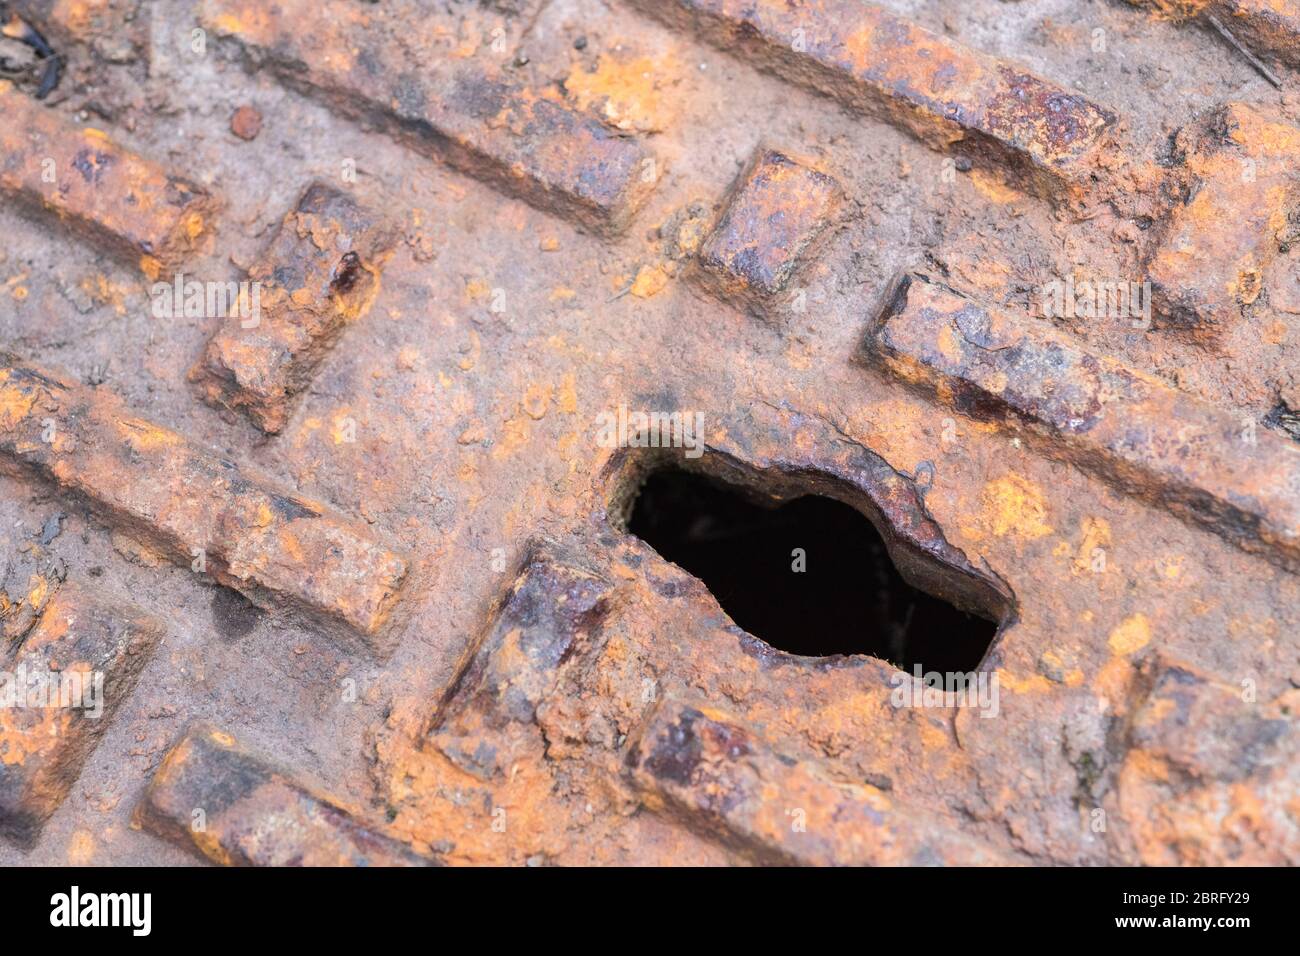 Close shot of rusty inspection cover with lifting keyhole. Abstract darkness, the unknown, what lies beyond. Stock Photo